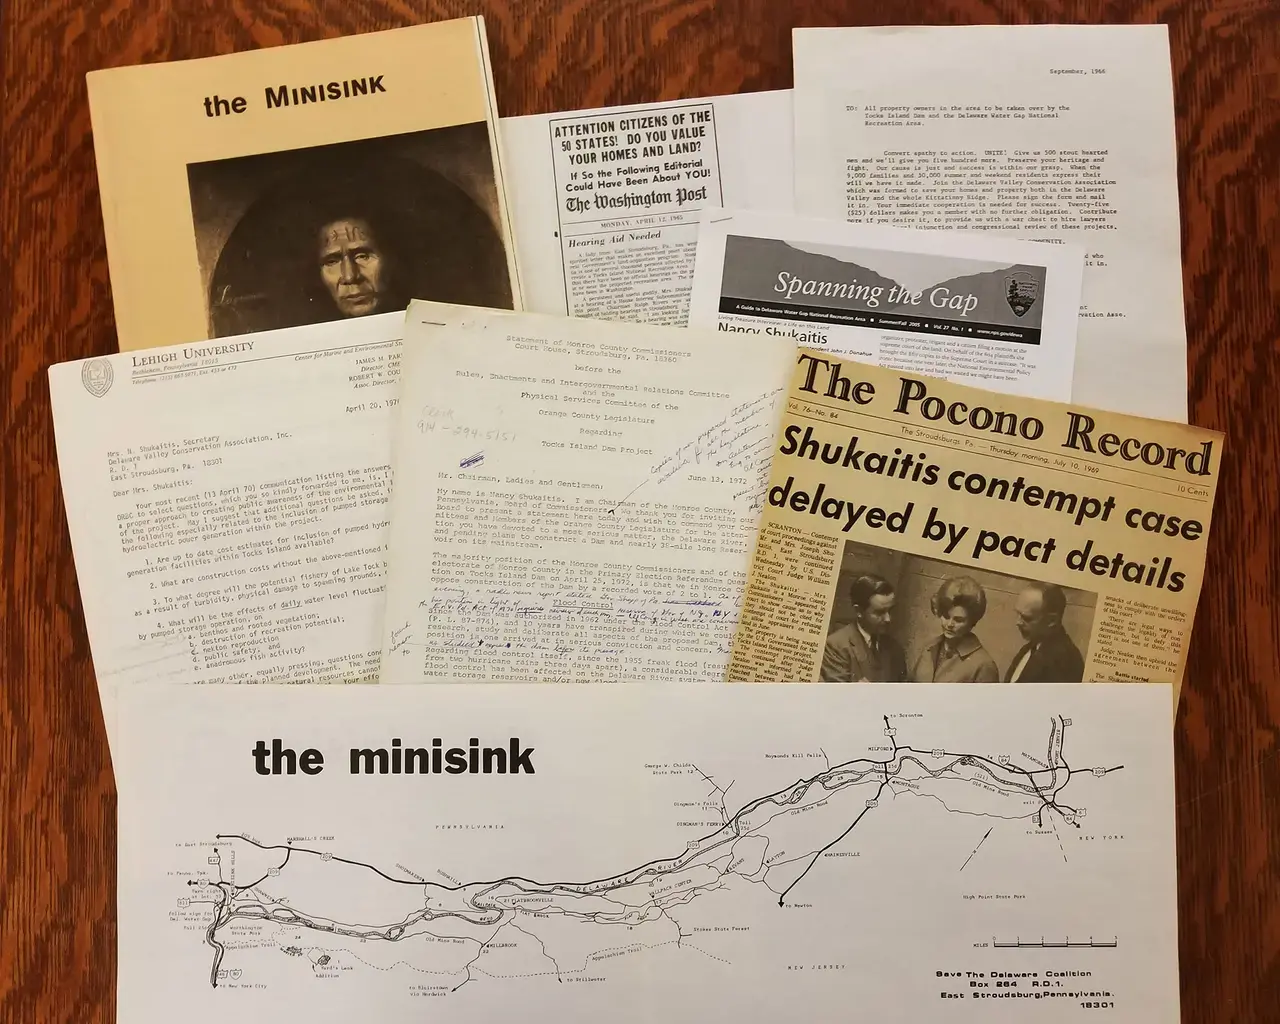 "Chronicling Resistance, Enabling Resistance," Nancy Michael Shulkaitis Papers, documents of resistance to Federal declarations and efforts to stop the Tocks Island Dam, Lehigh University SC MS 0238. Photo courtesy of Philadelphia Area Consortium of Special Collections Libraries.&nbsp;&nbsp;